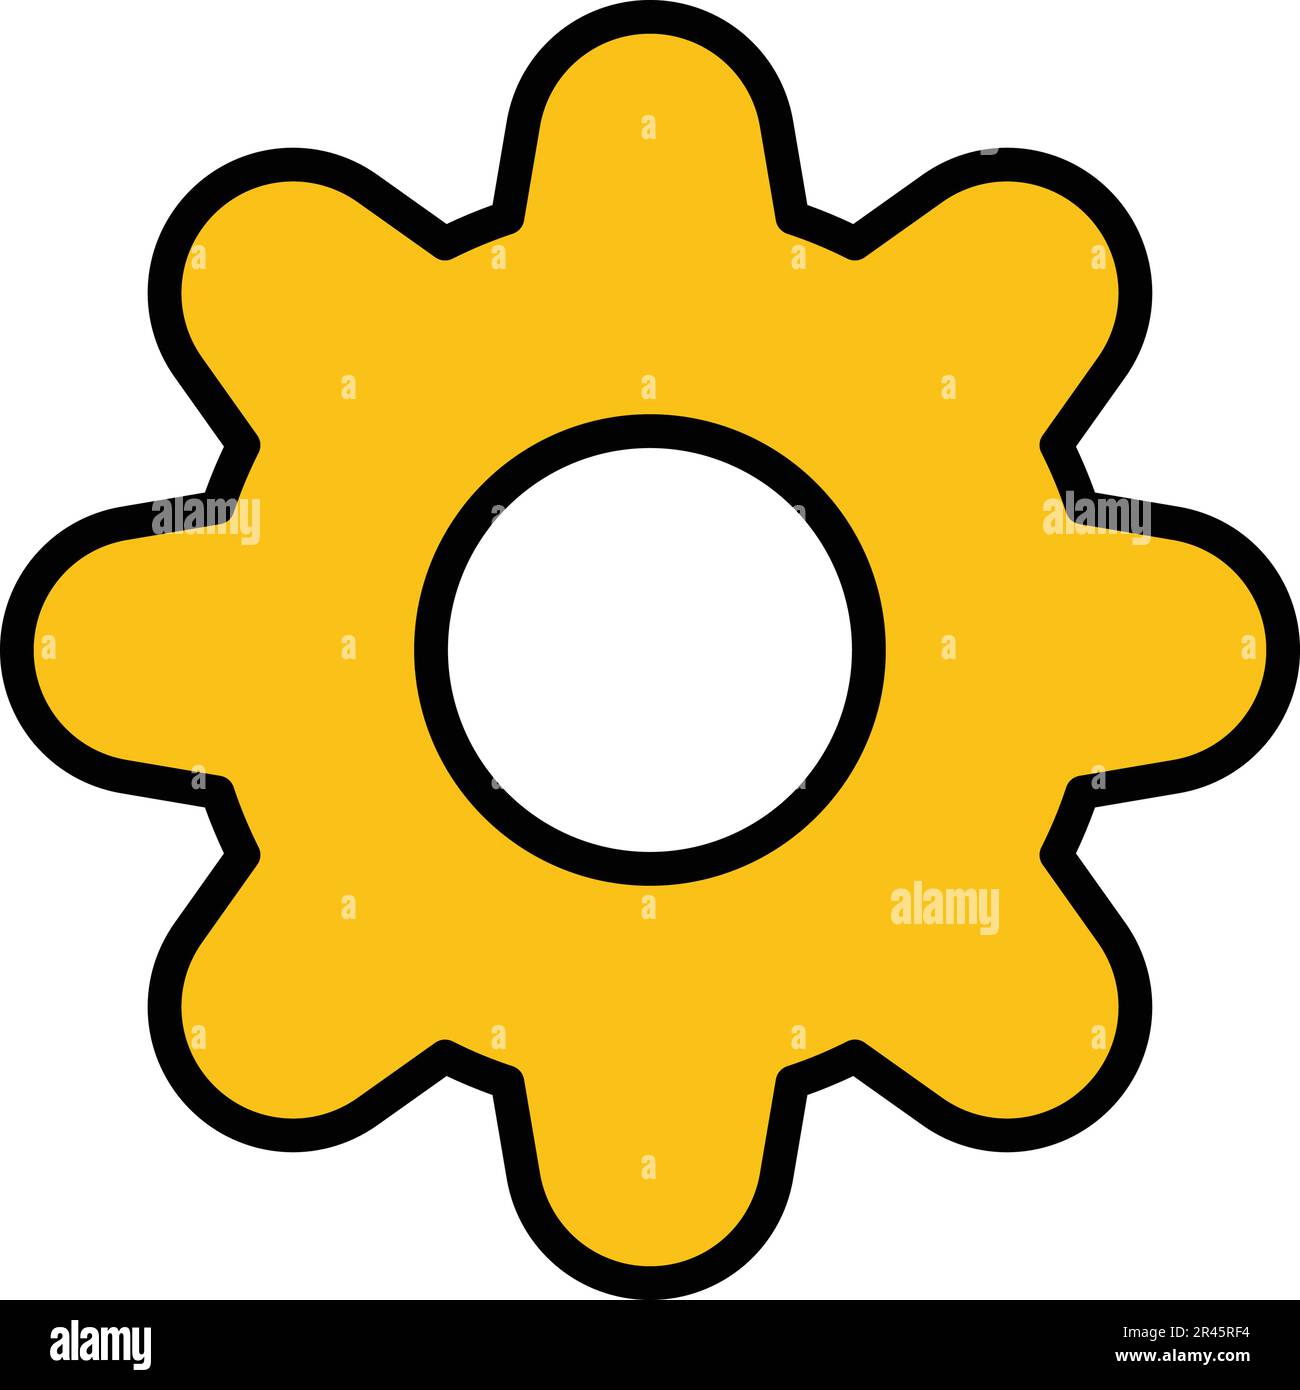 Configuration, gear, options, settings icon - Perfect use for printed files and presentations, designing and developing websites, promotional material Stock Vector